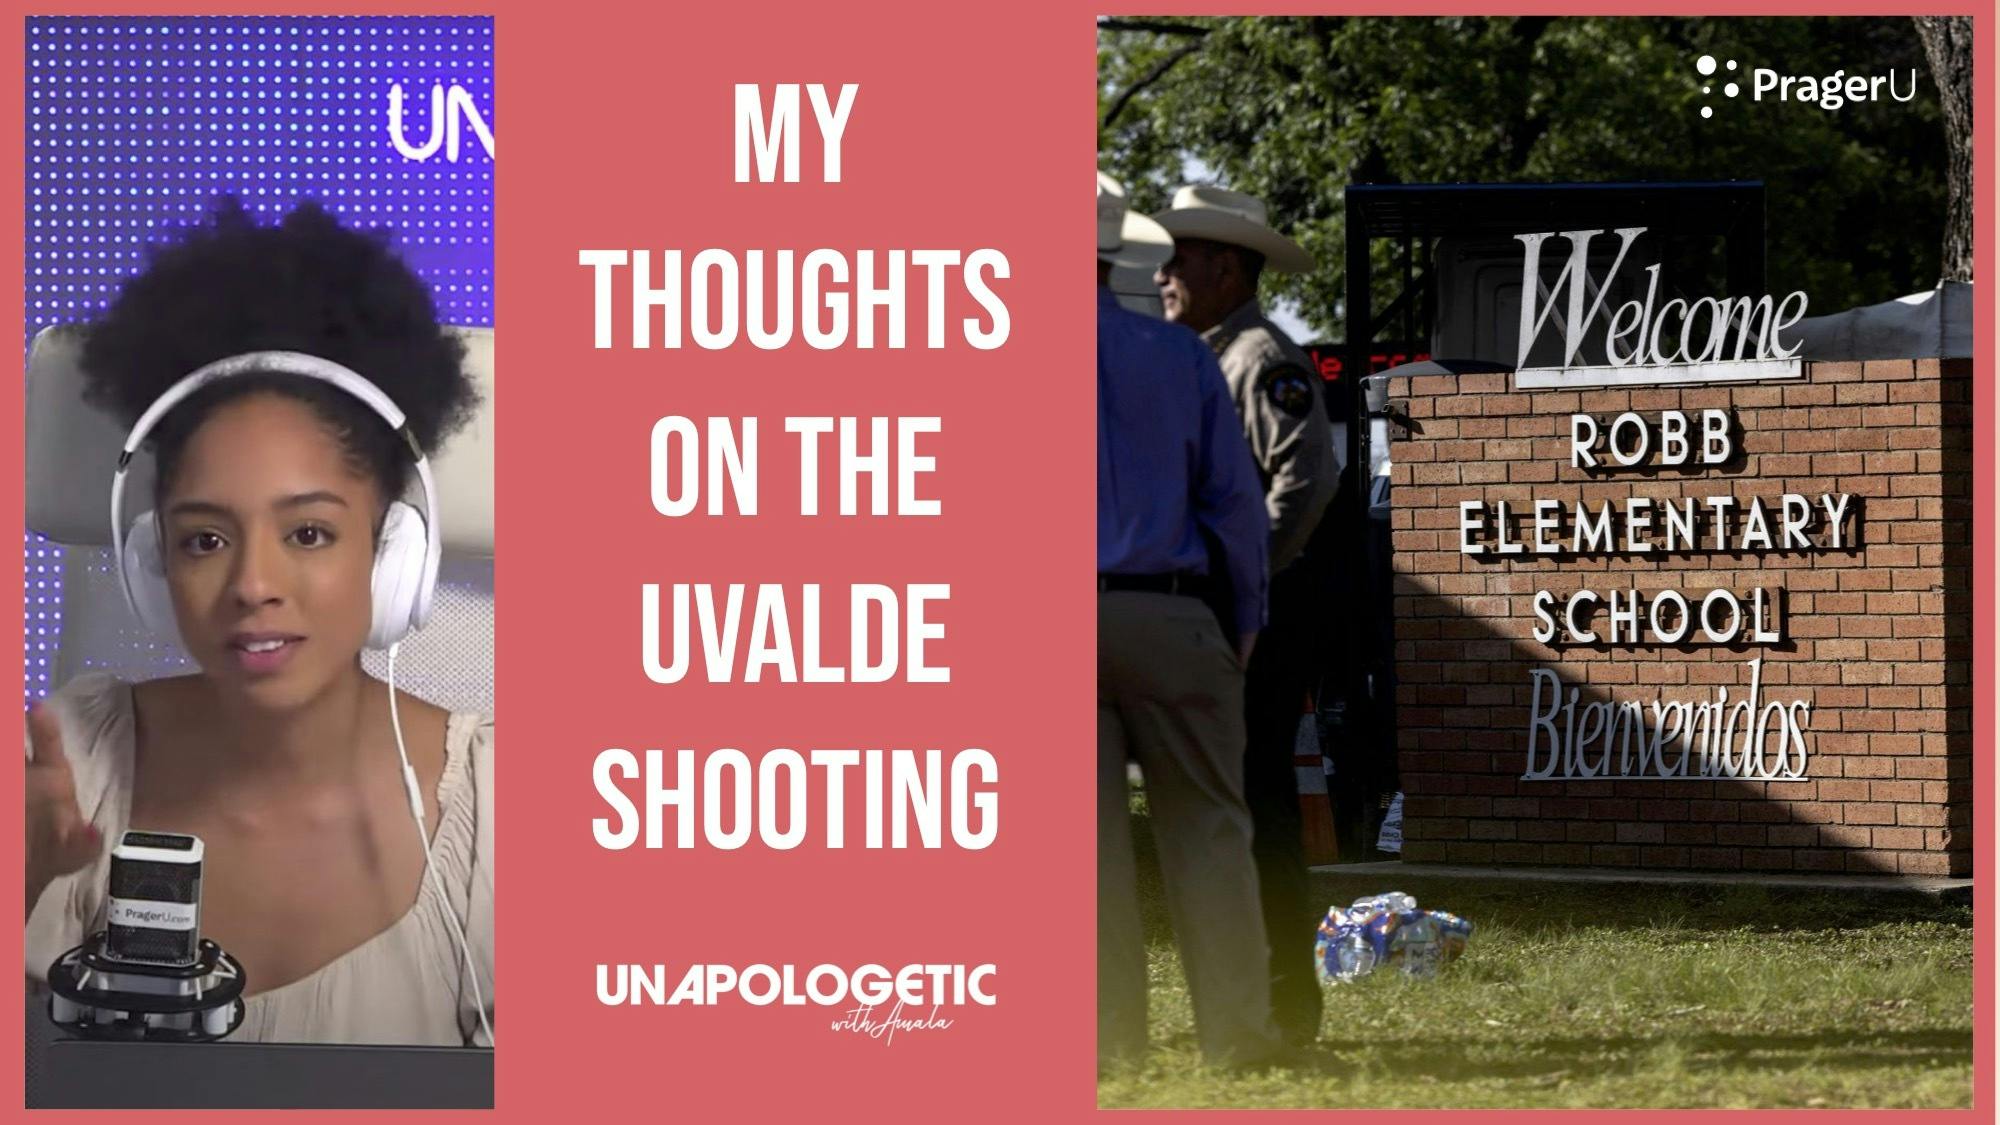 My Thoughts on the Uvalde Shooting: 5/25/2022